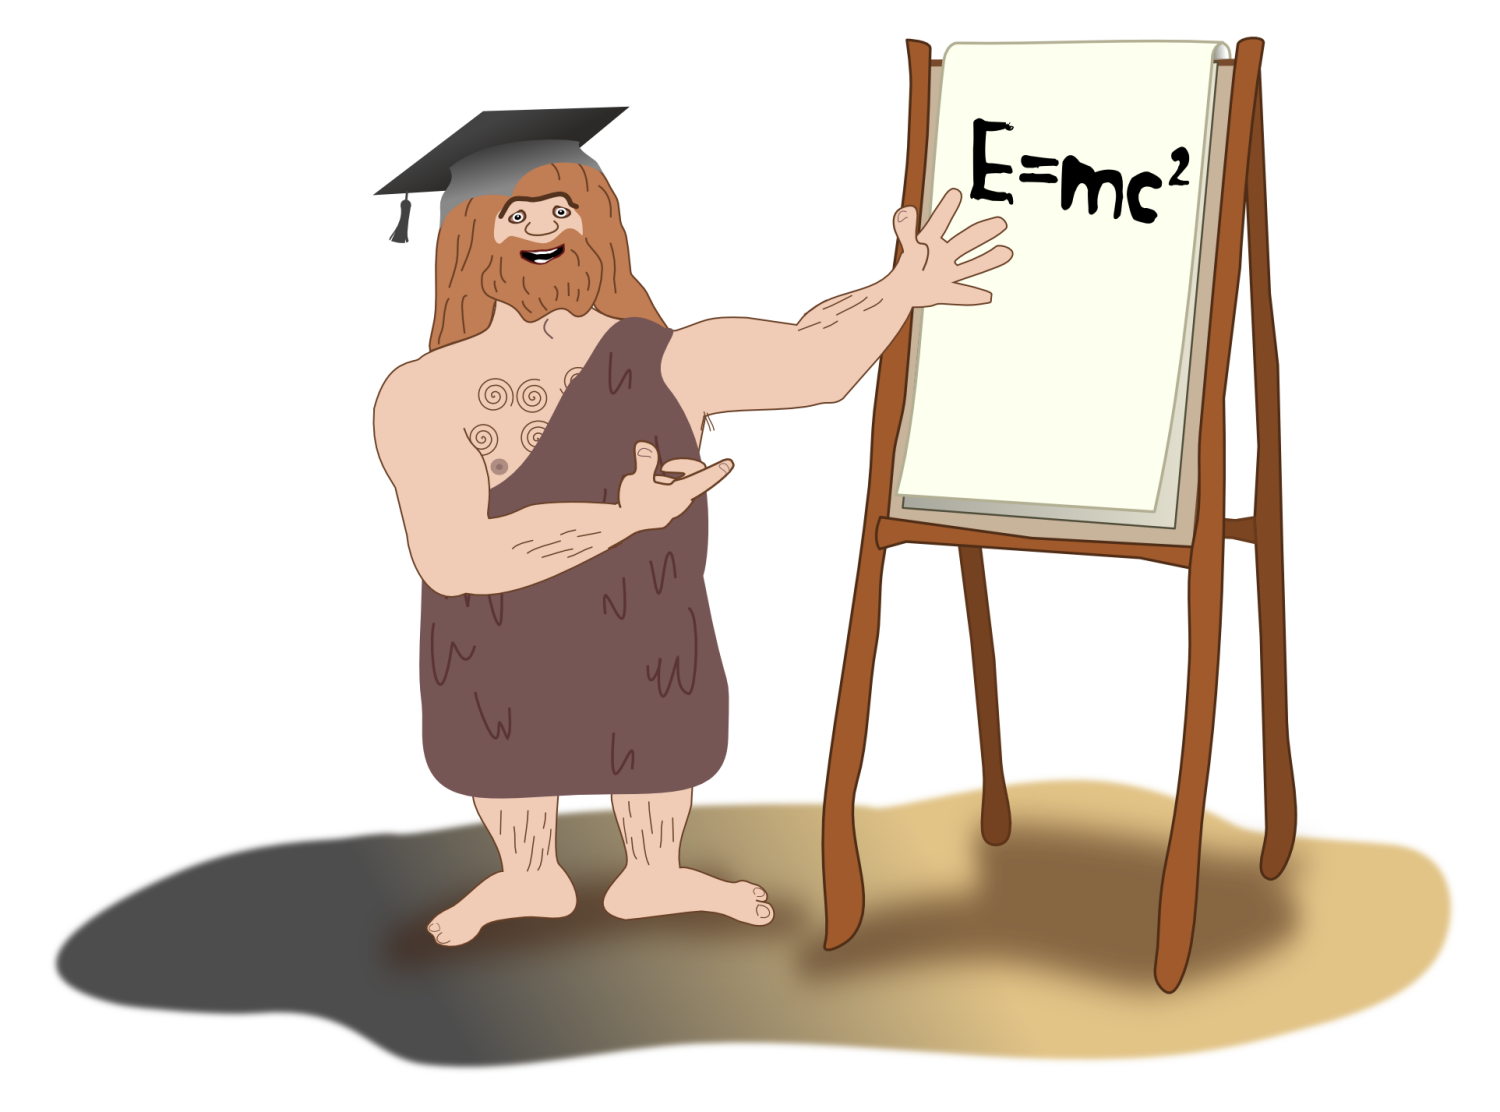 Illustration of caveman in business presentation from Online Sales Training Modules, Limelight Learning UK